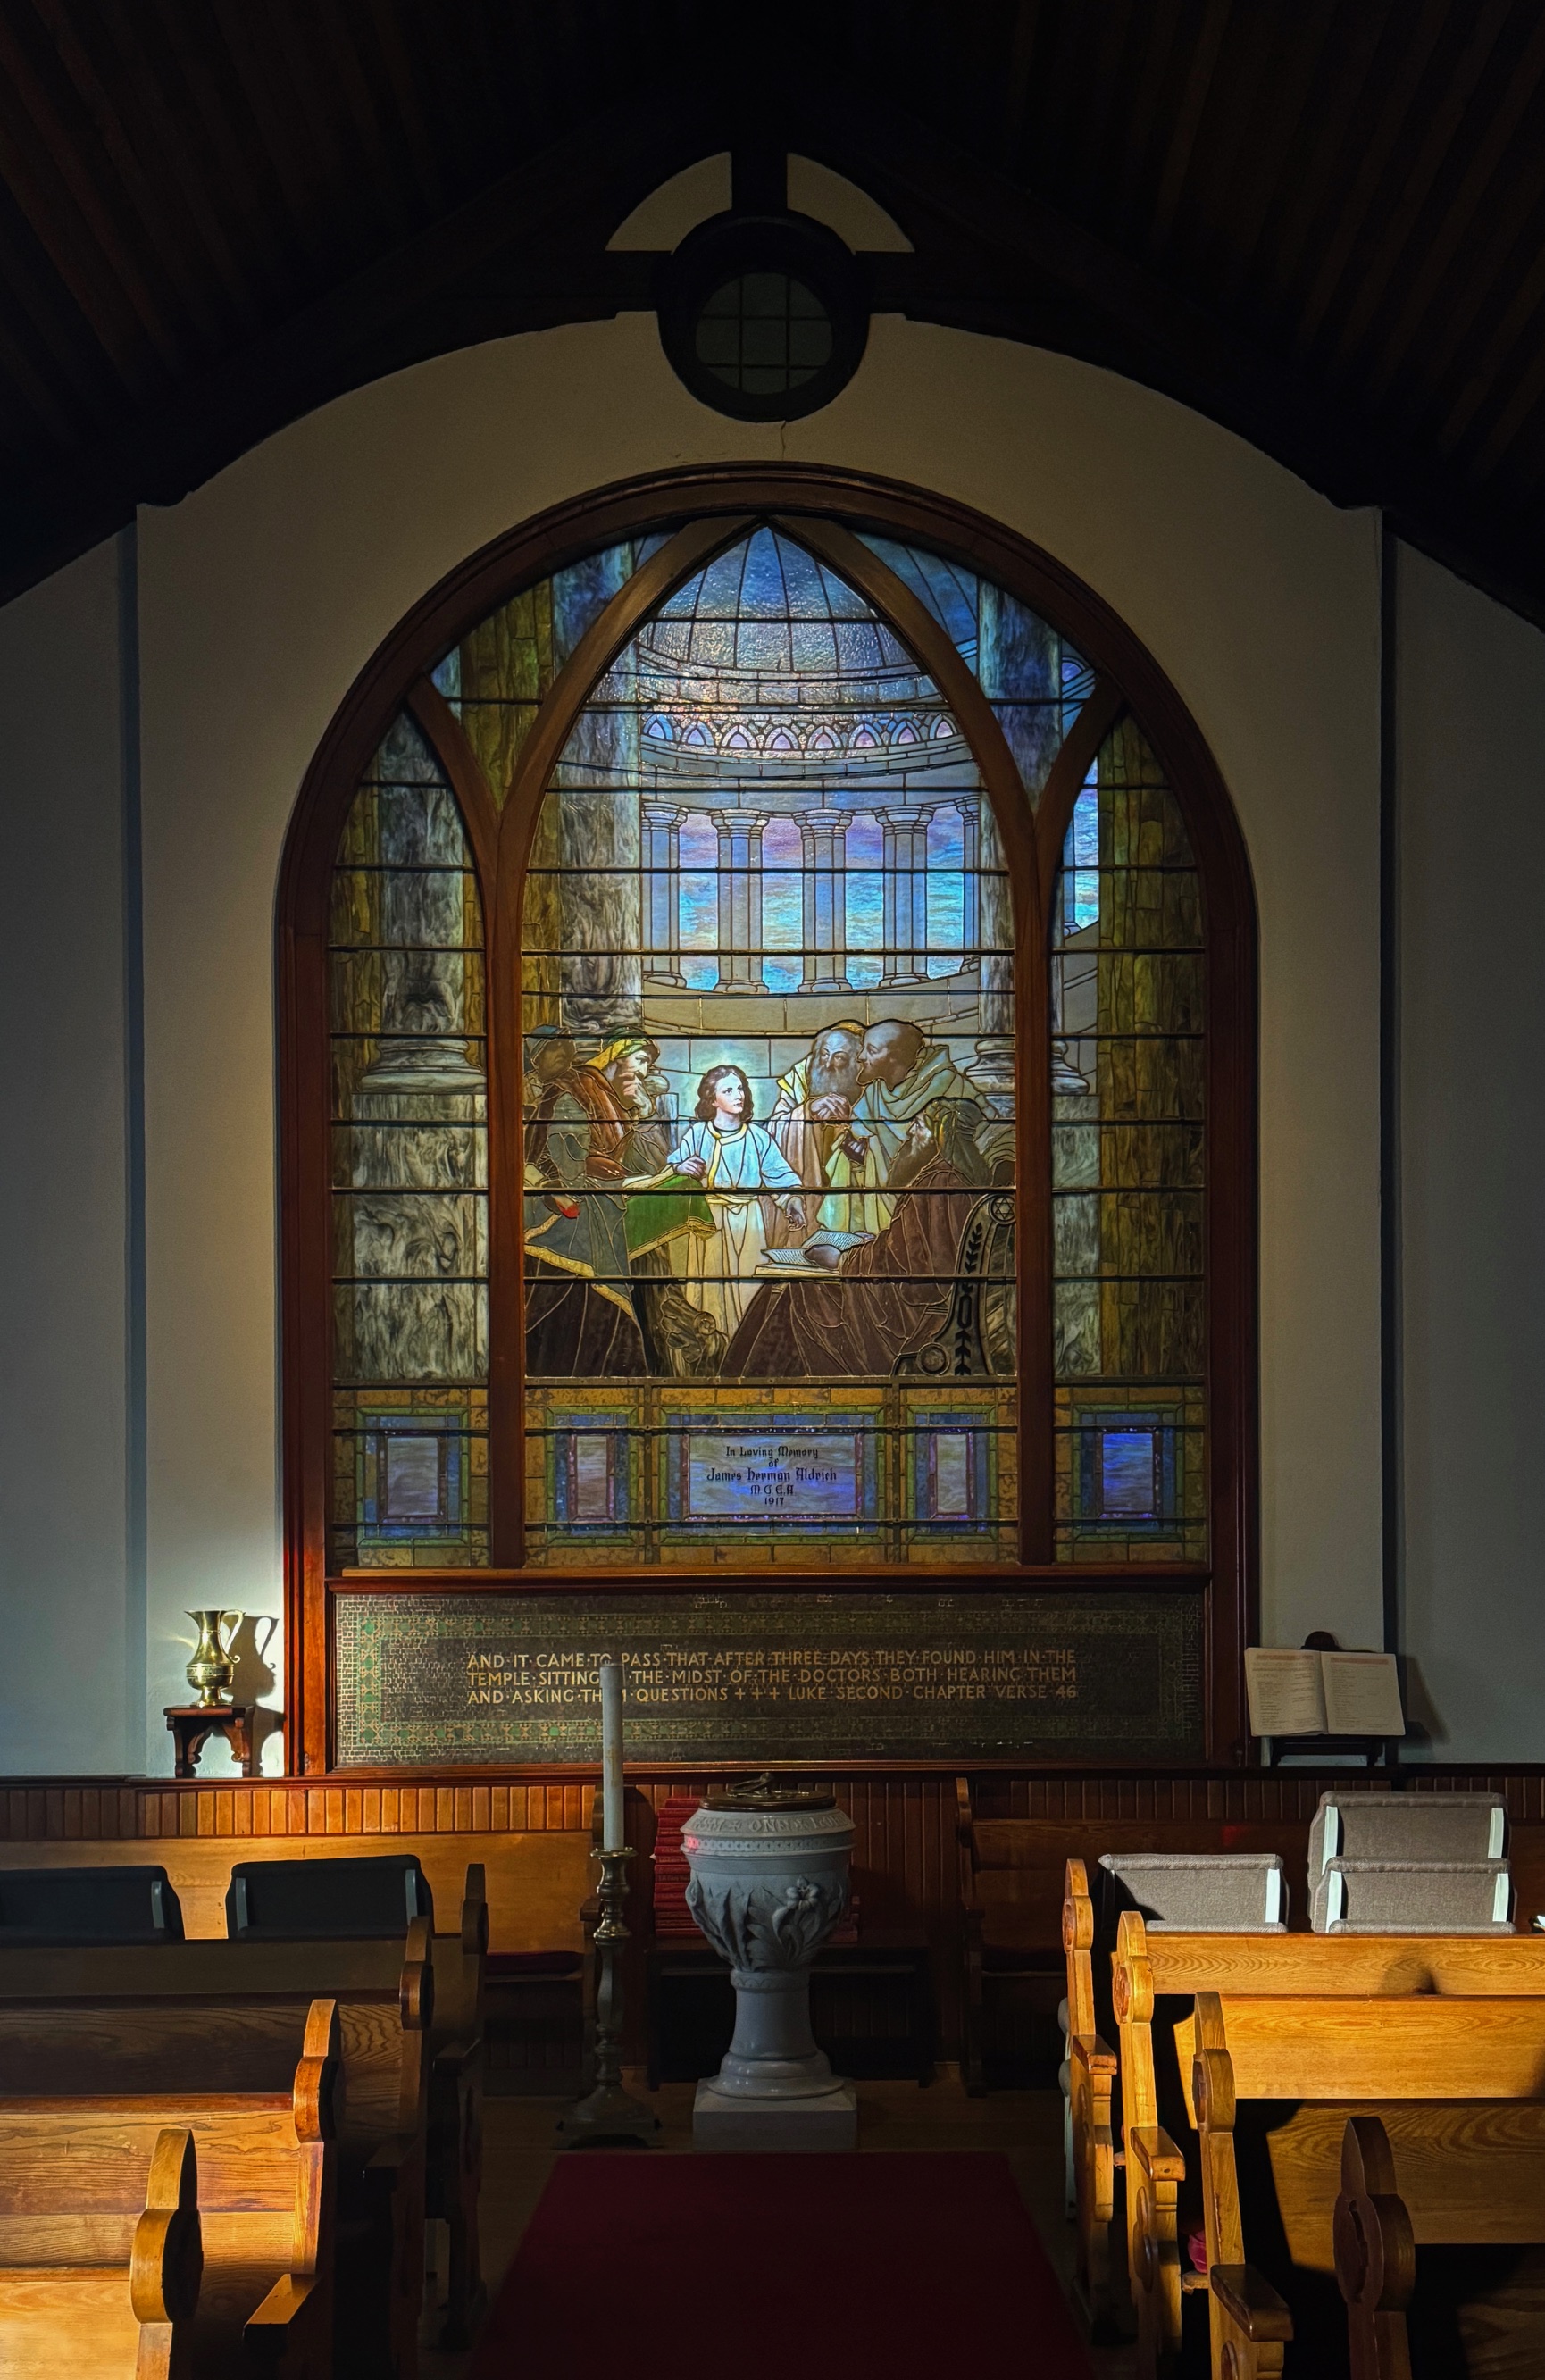 Architectural Tours of the Old Whalers' Church & Christ Episcopal Church